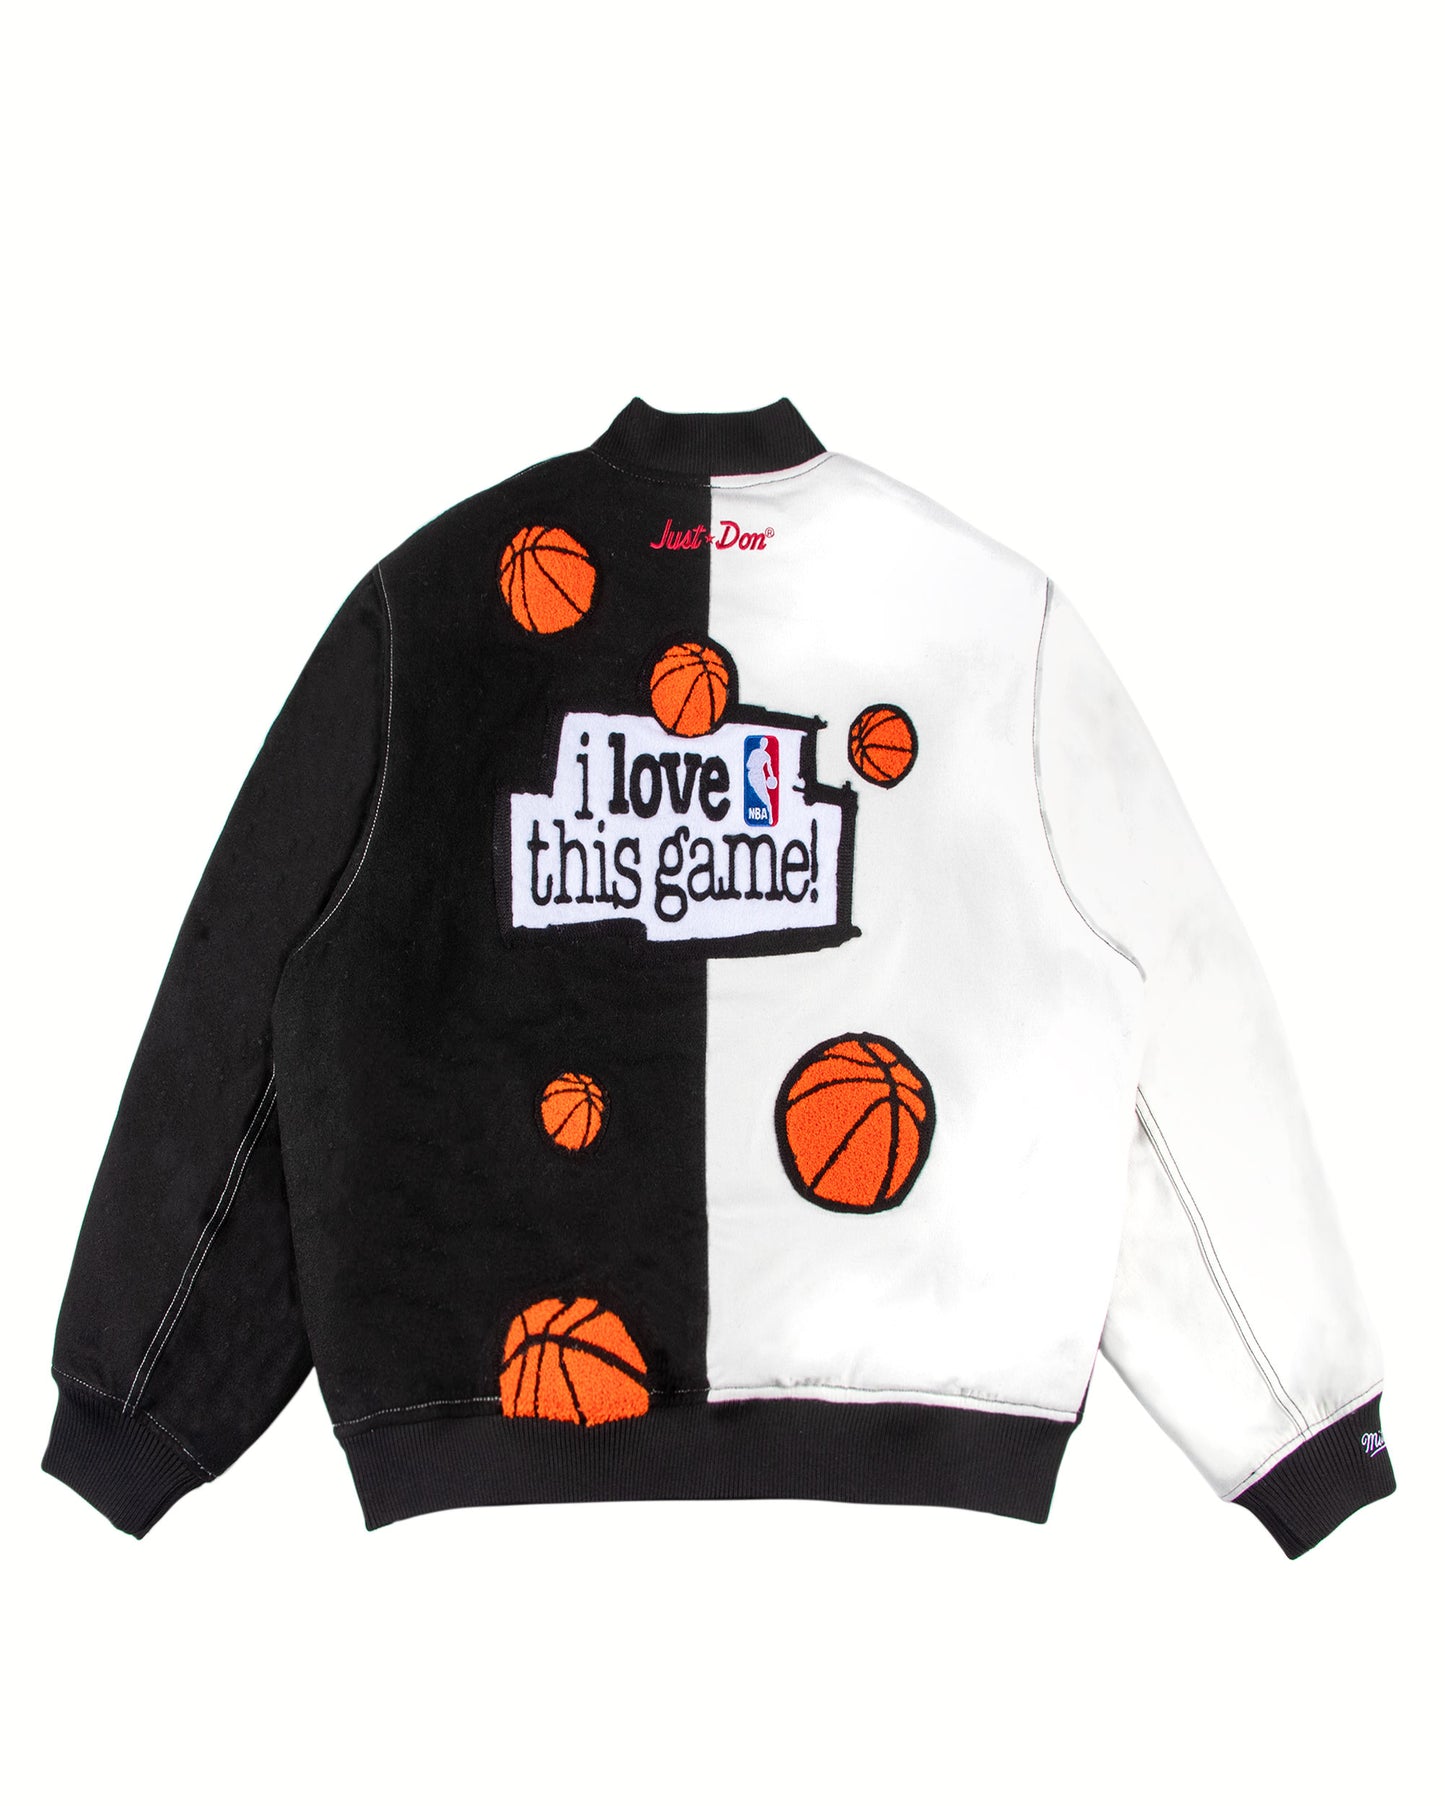 JUST DON "I LOVE THIS GAME" JACKET